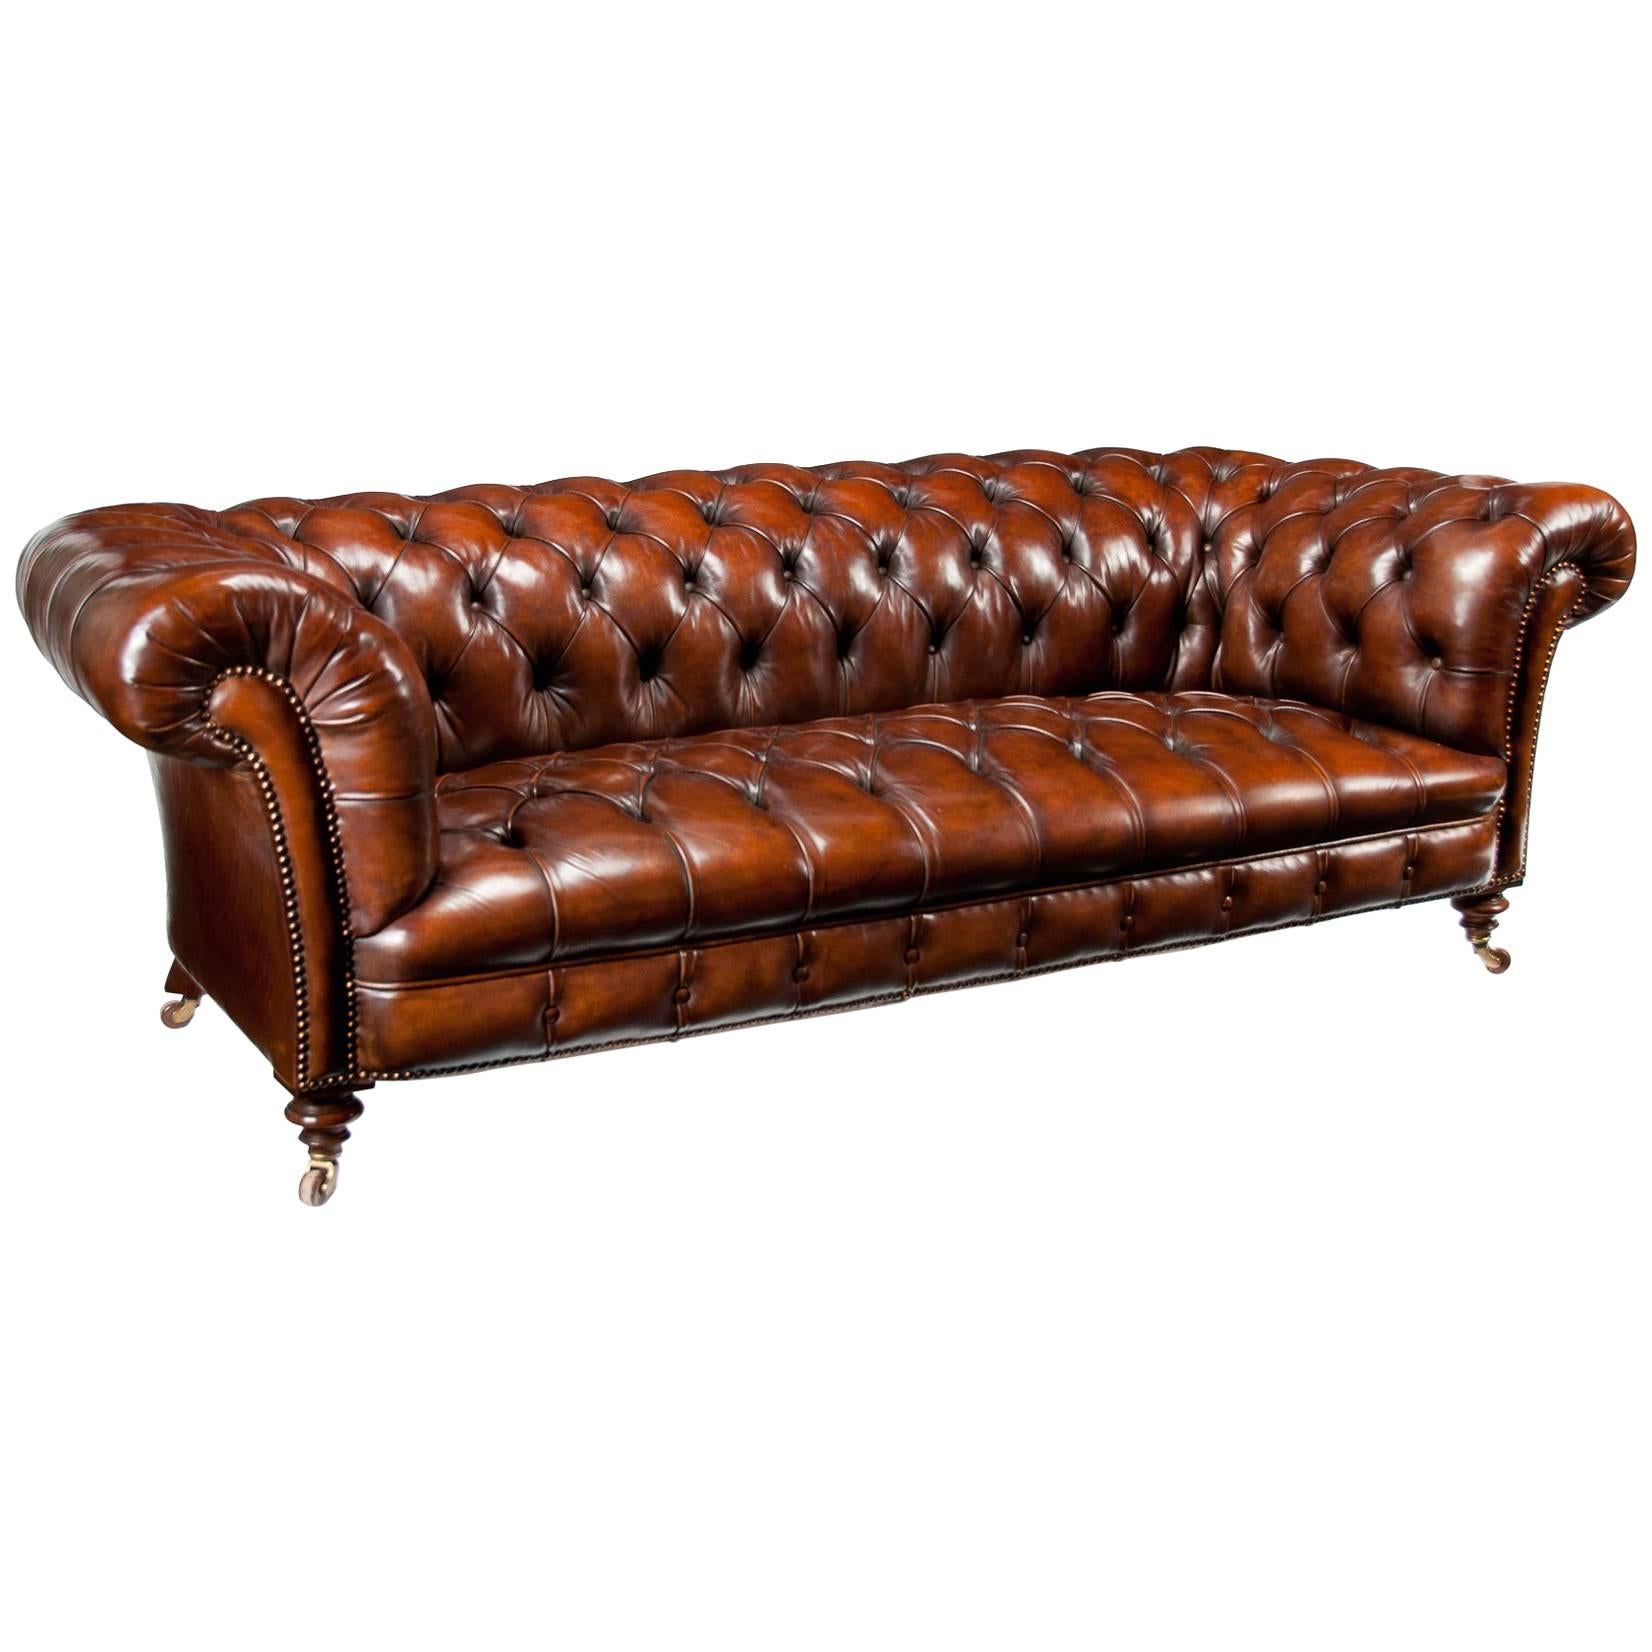 Victorian James Jas Shoolbred Leather Walnut Chesterfield Fully Stamped